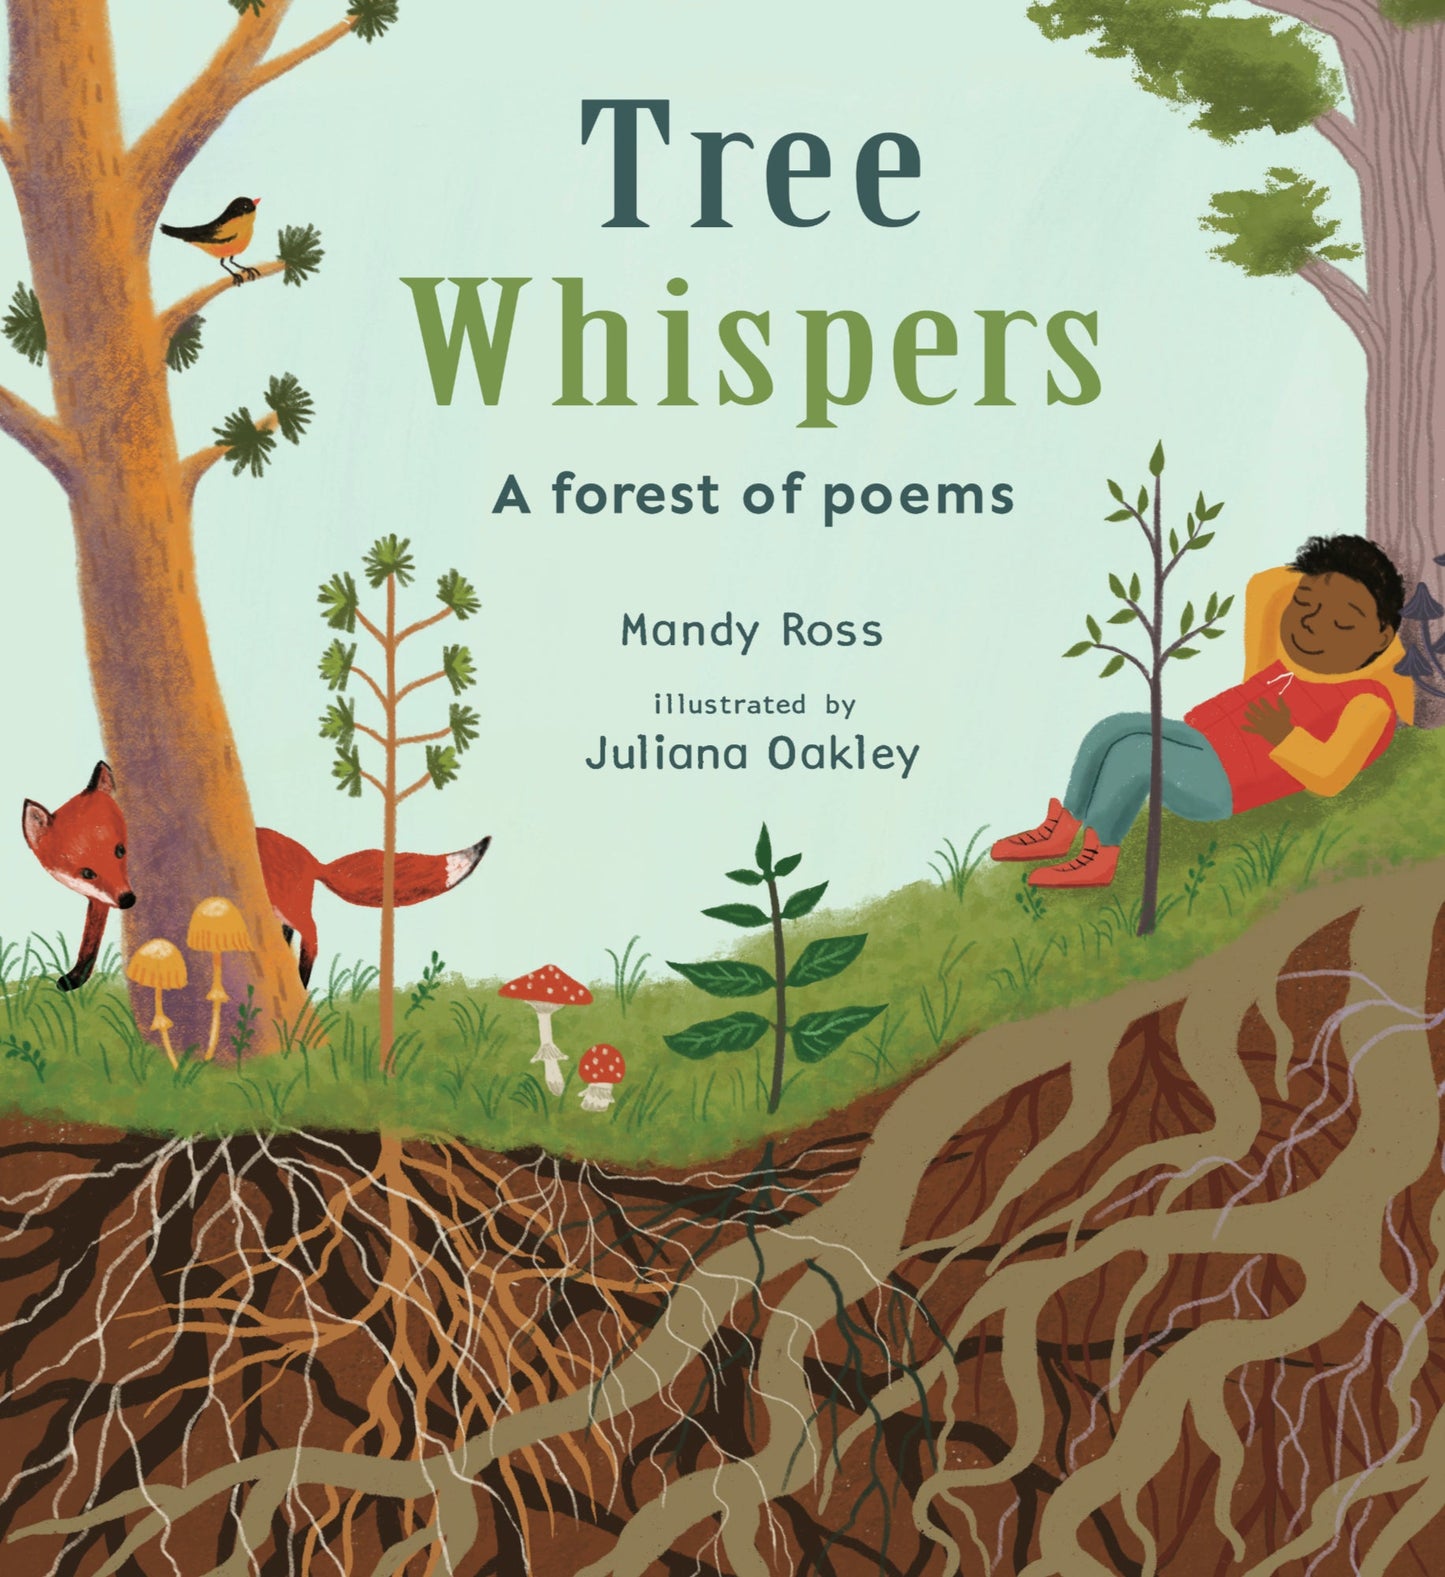 Tree Whispers (Hardcover Edition)